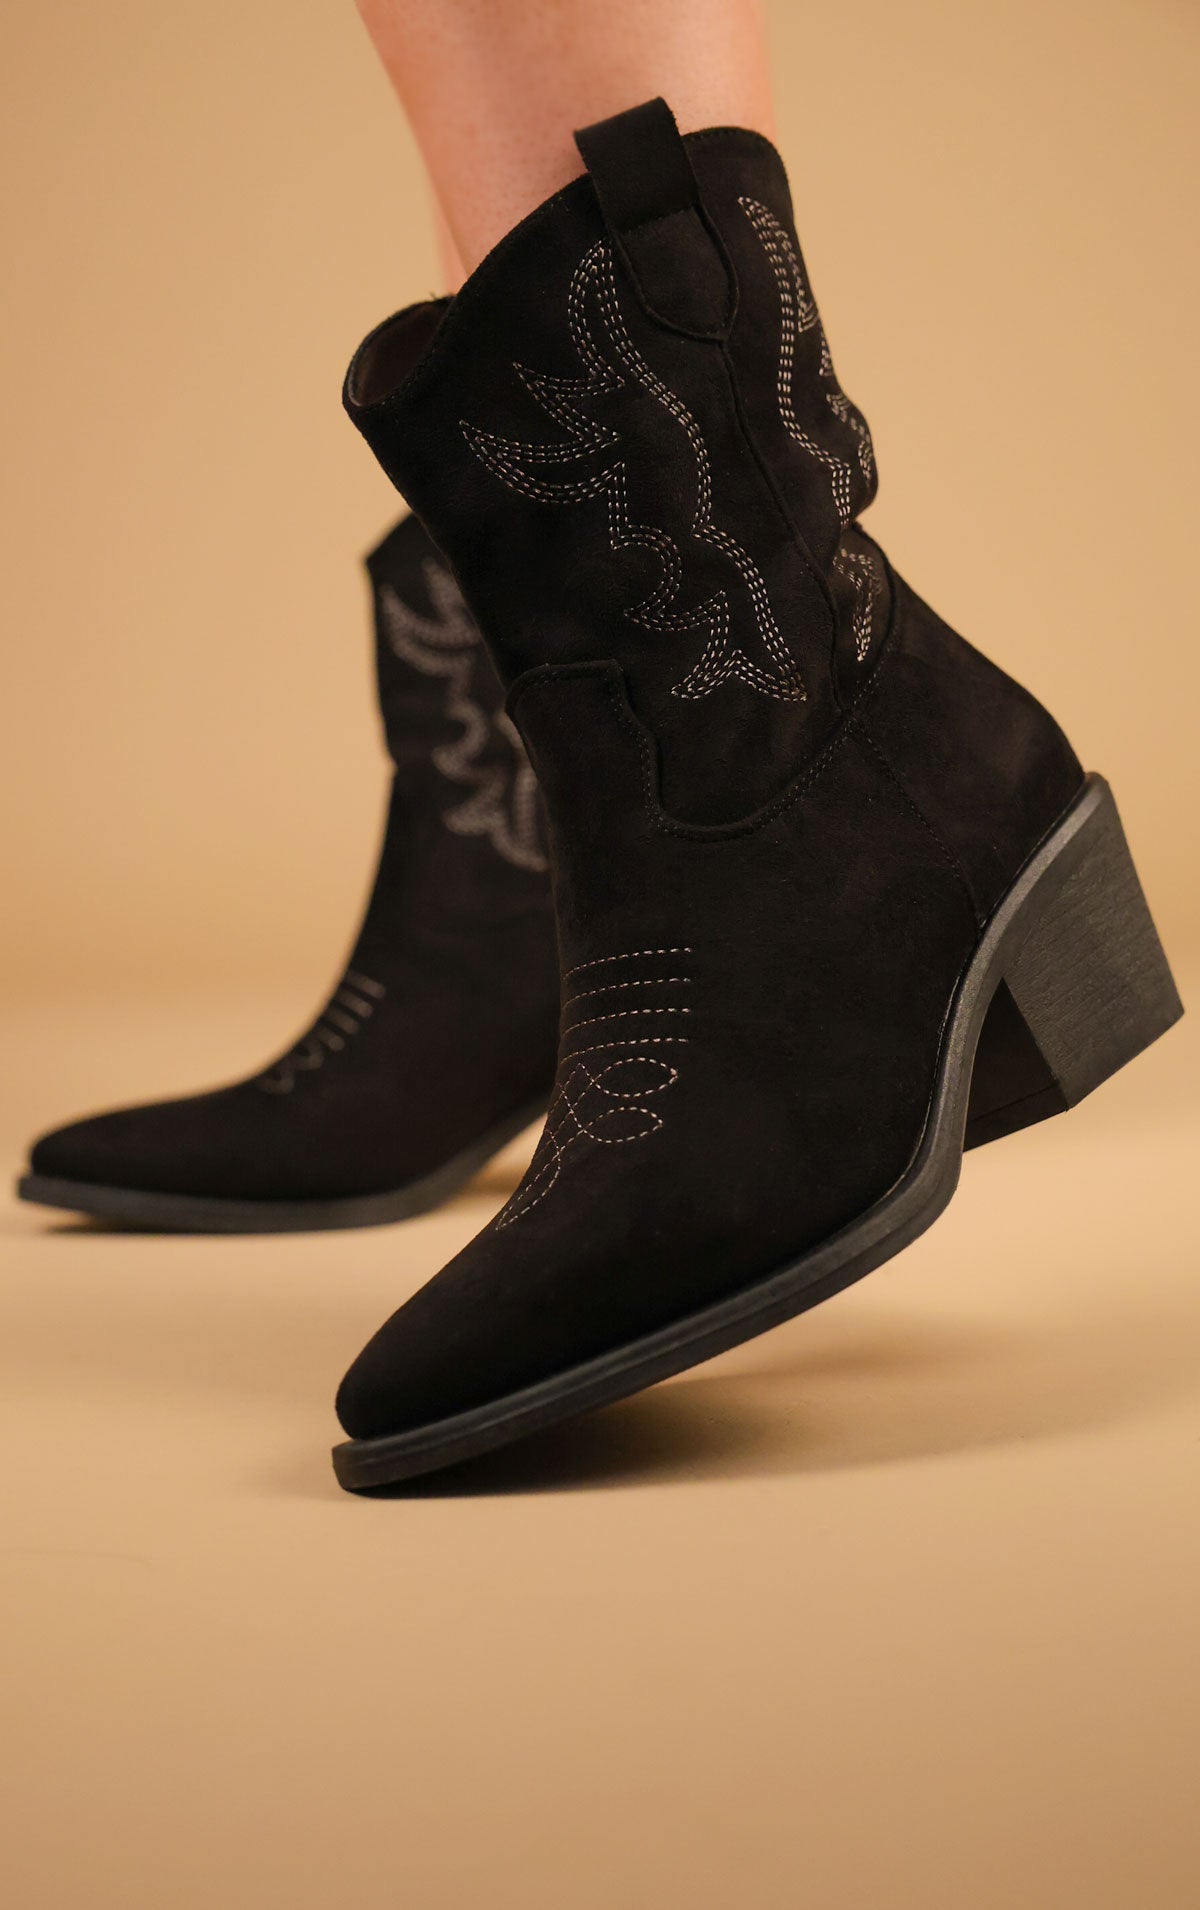 Black Embroidered Suede Cowboy Ankle Boots